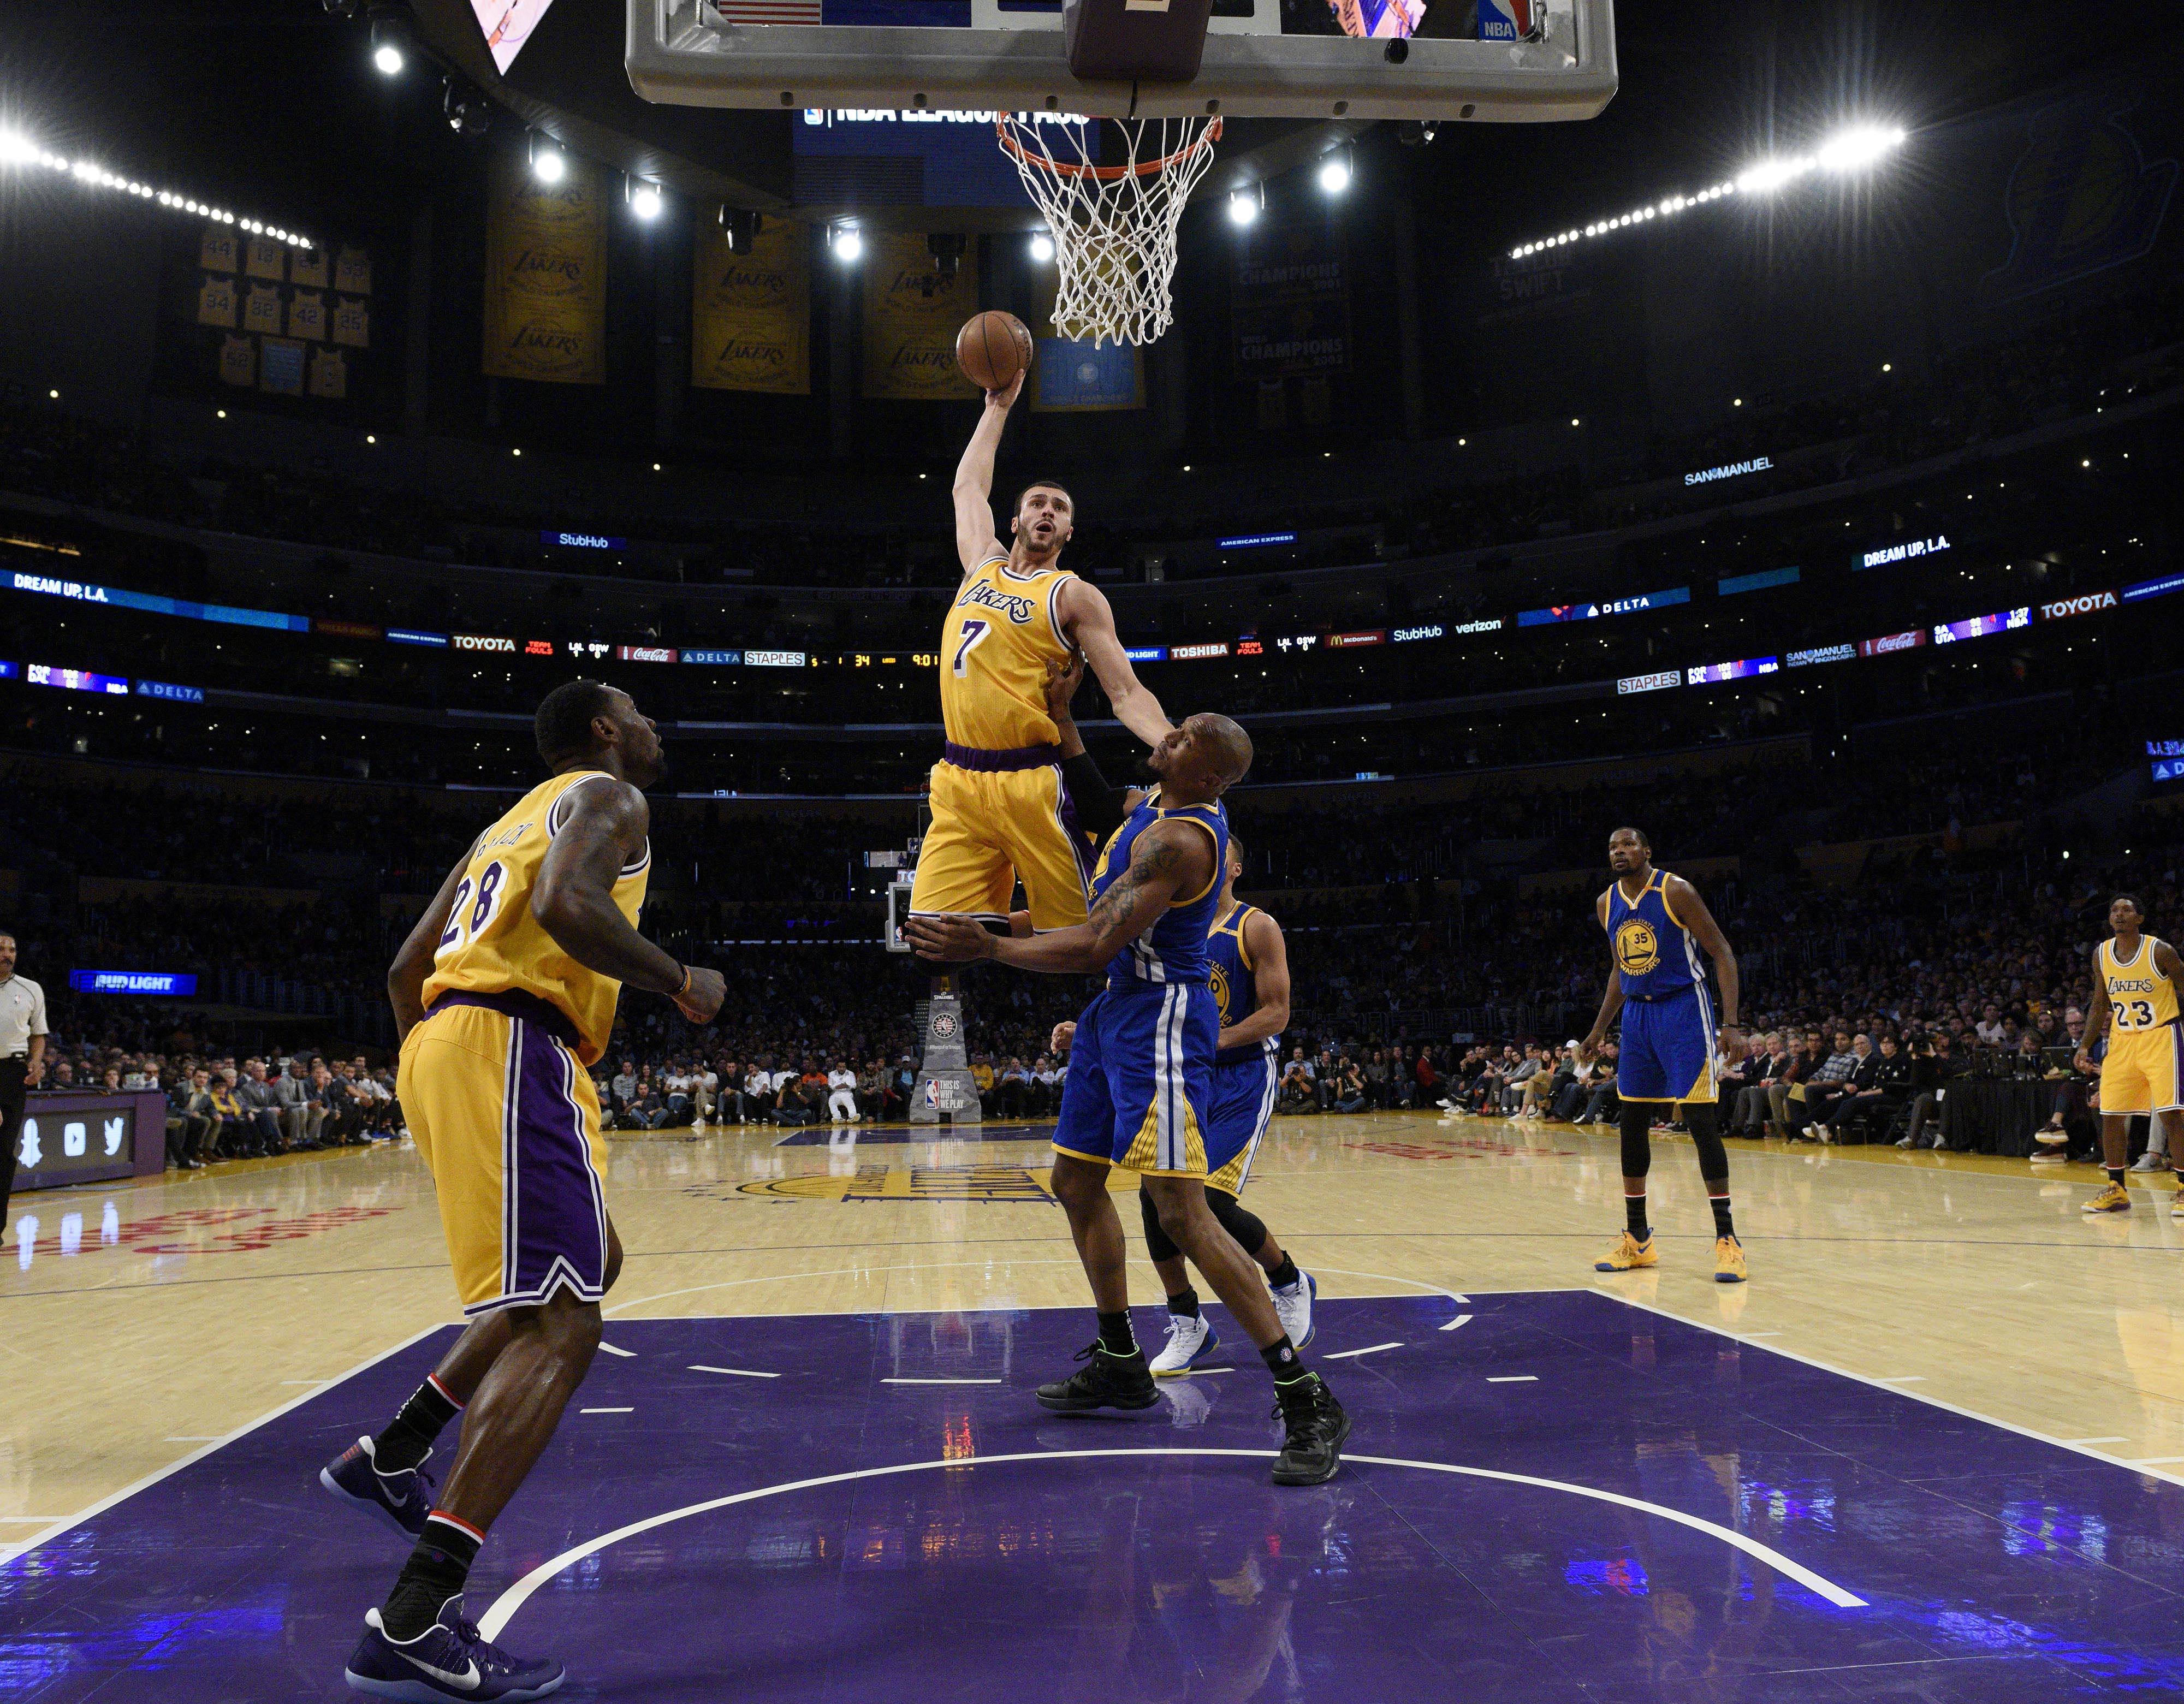 3 breathtaking photos of Larry Nance Jr.’s incredible dunk over David